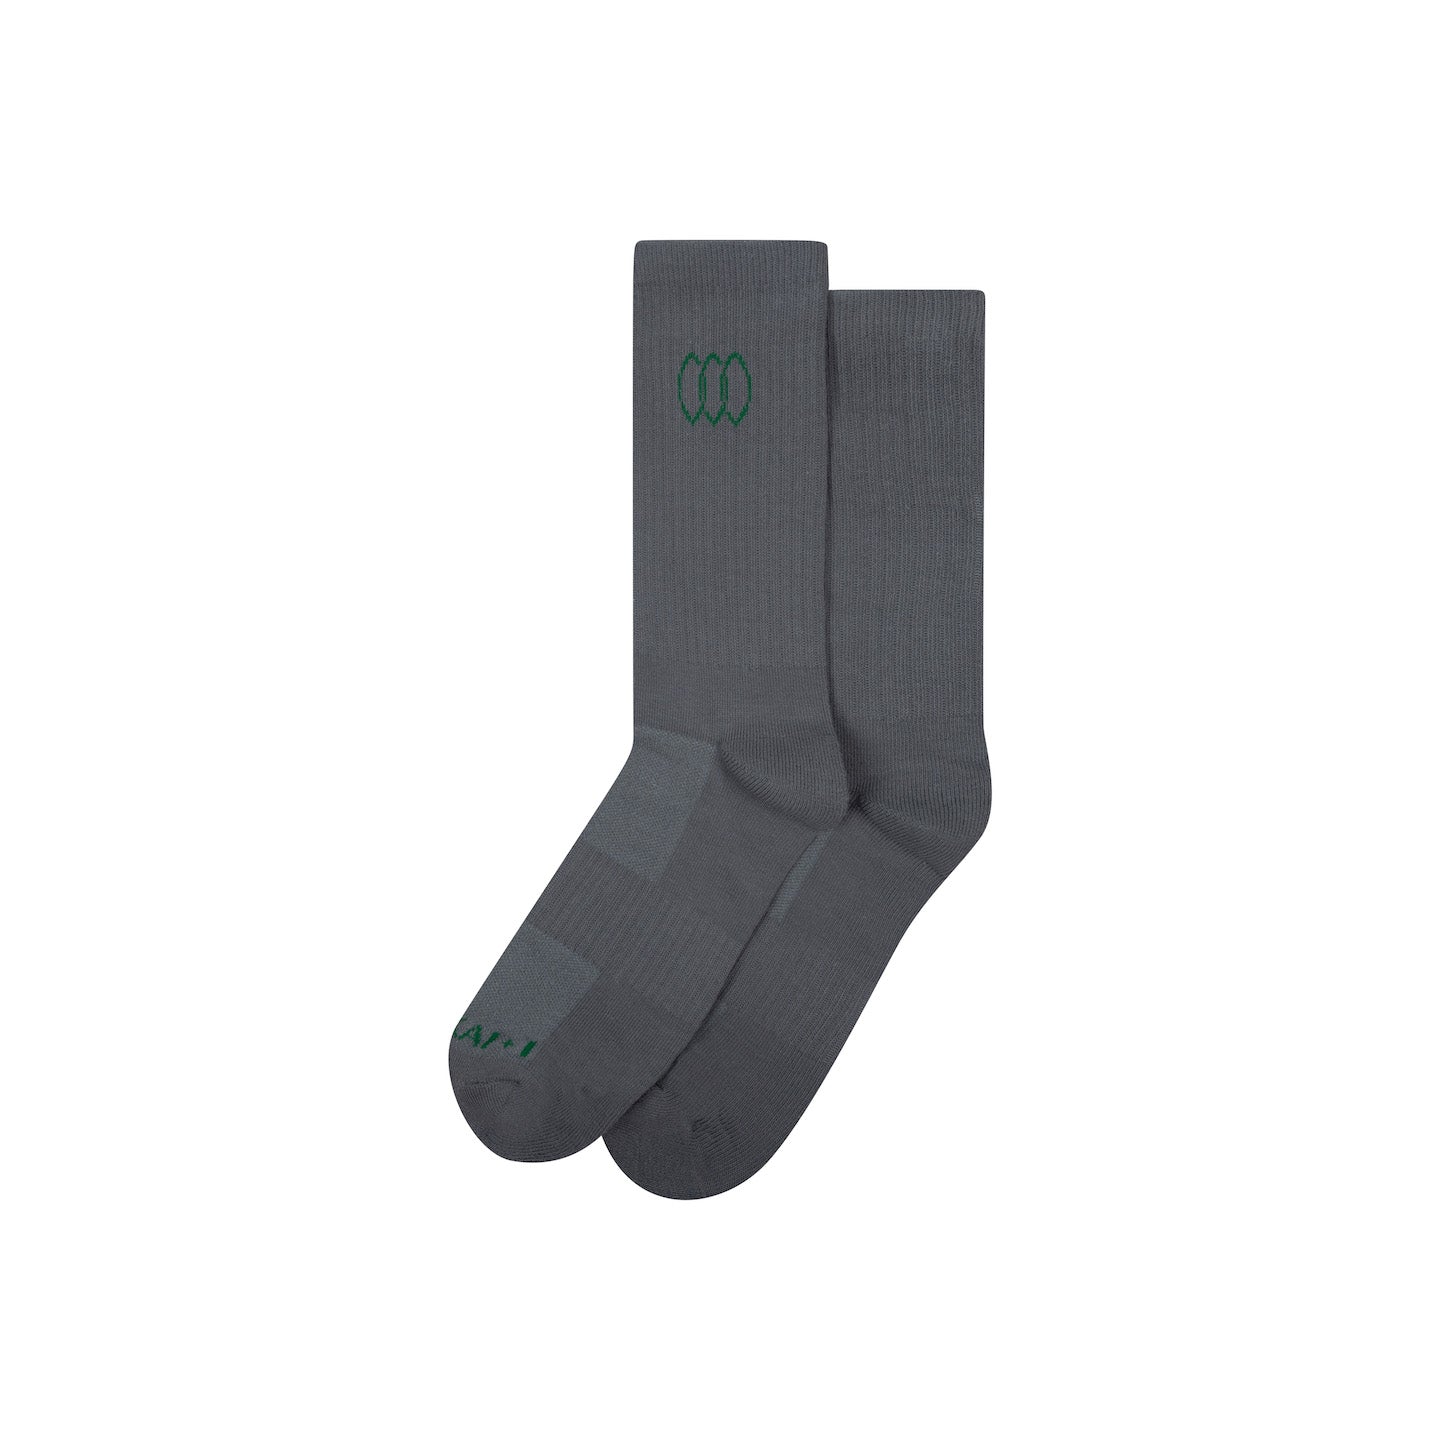 Three Leaf Cotton Cotton Socks by Her Kai & I. It features our sage leaf logo print in Forest Green